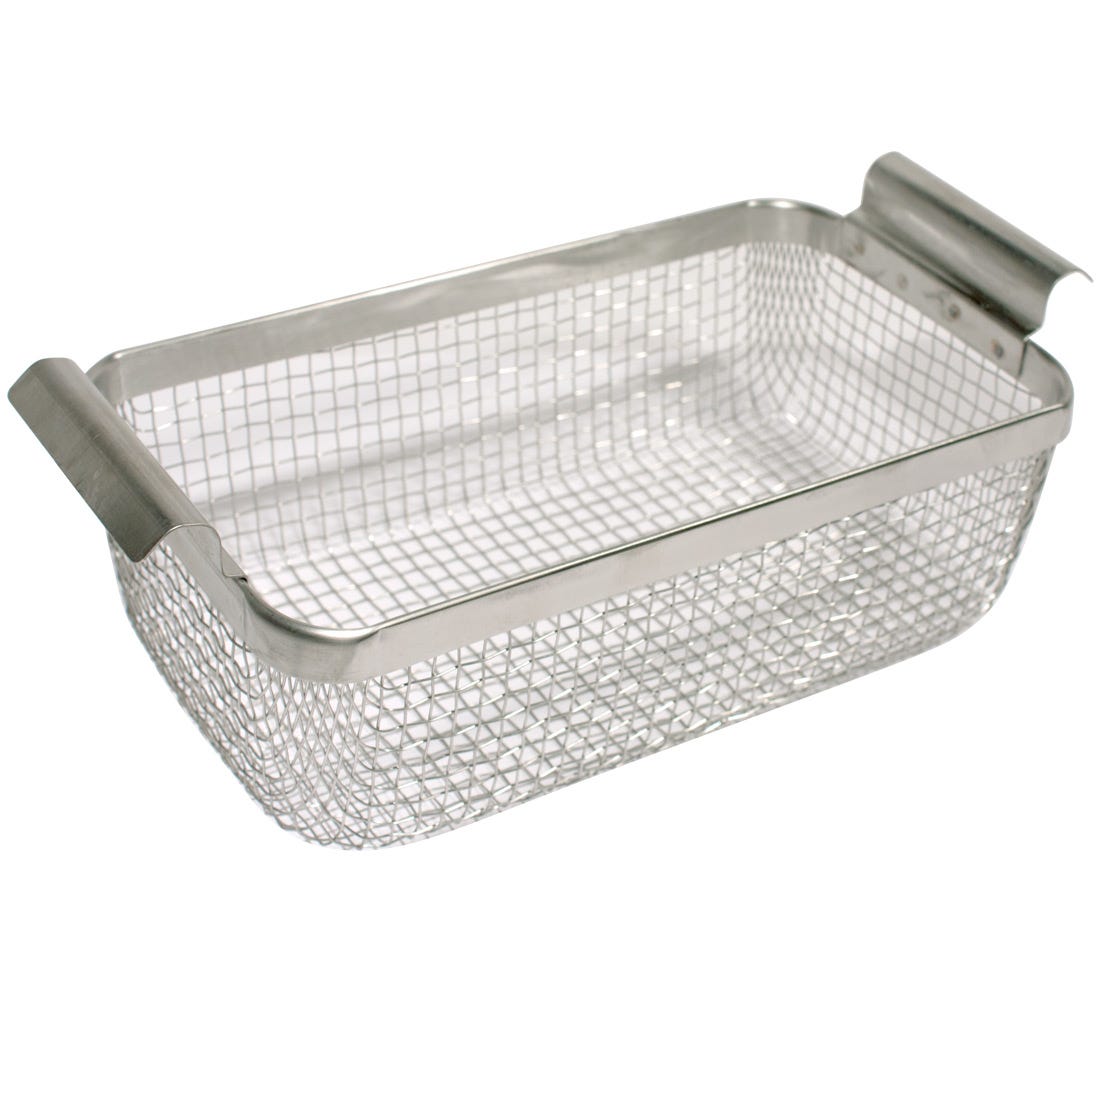 Stainless Steel Wire Basket for Q140 Ultrasonic Cleaning System